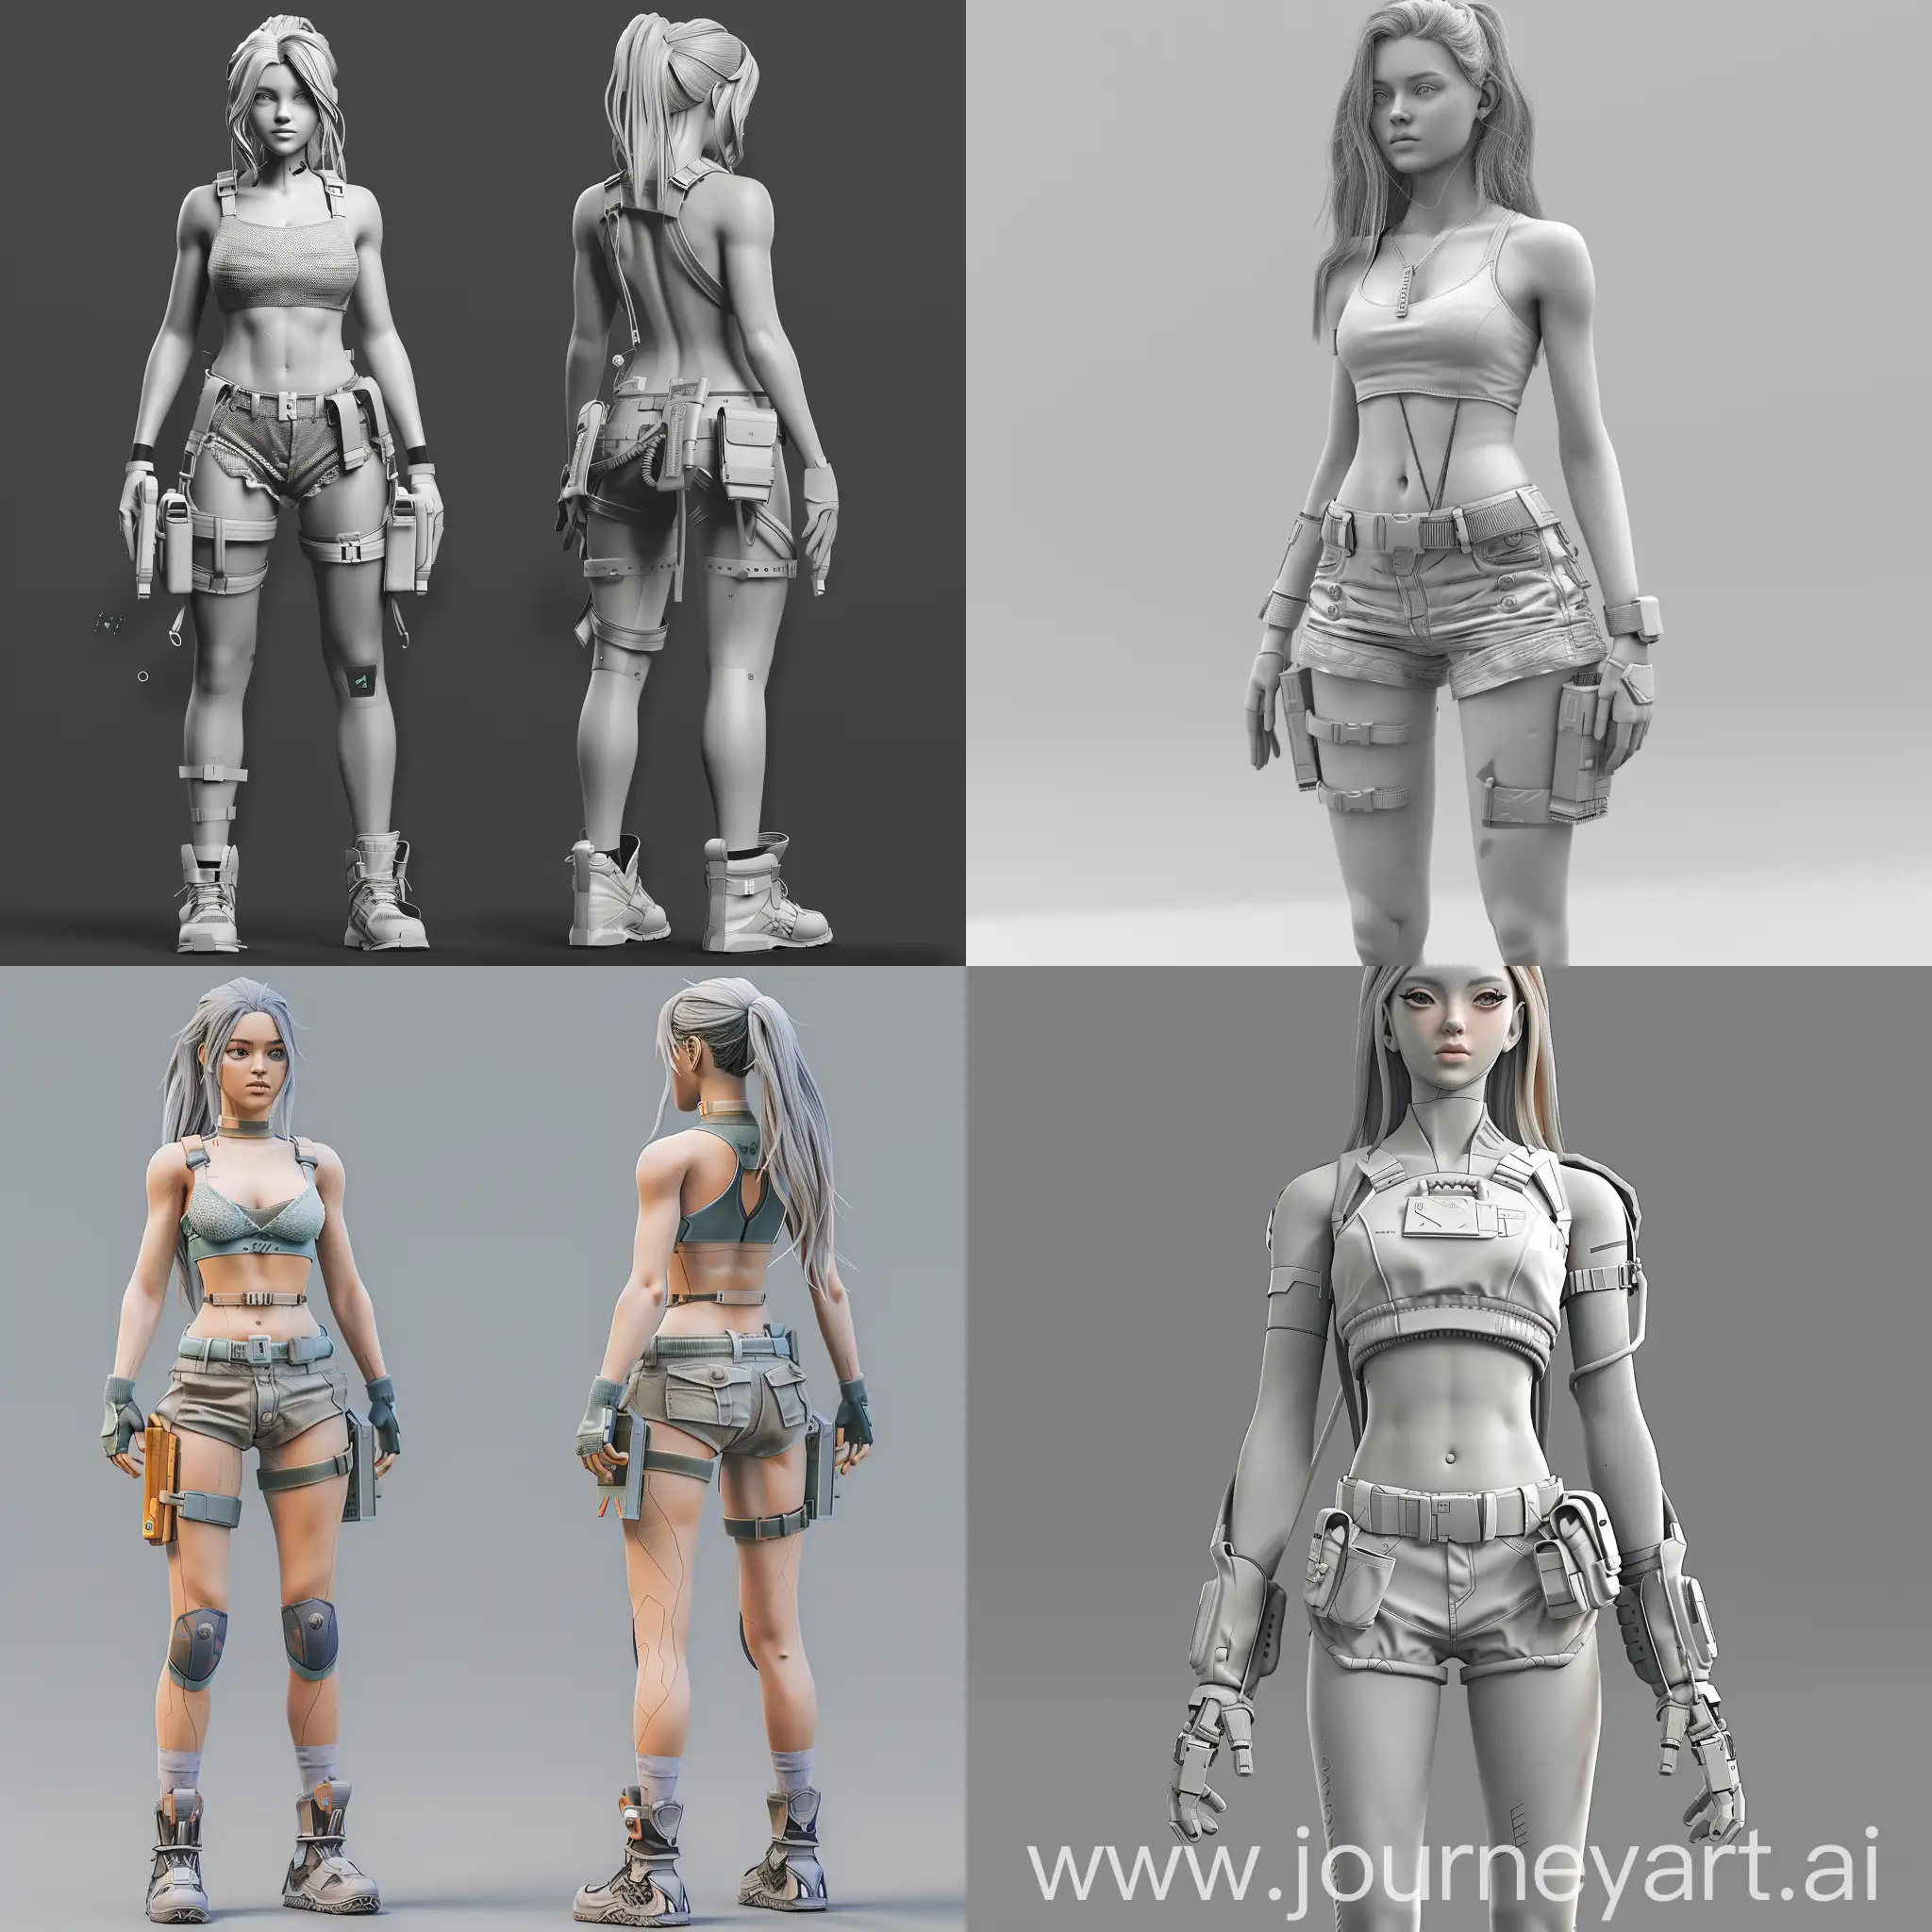 Cyberpunk-Girl-in-Shorts-and-Top-Futuristic-Character-Model-Deployment